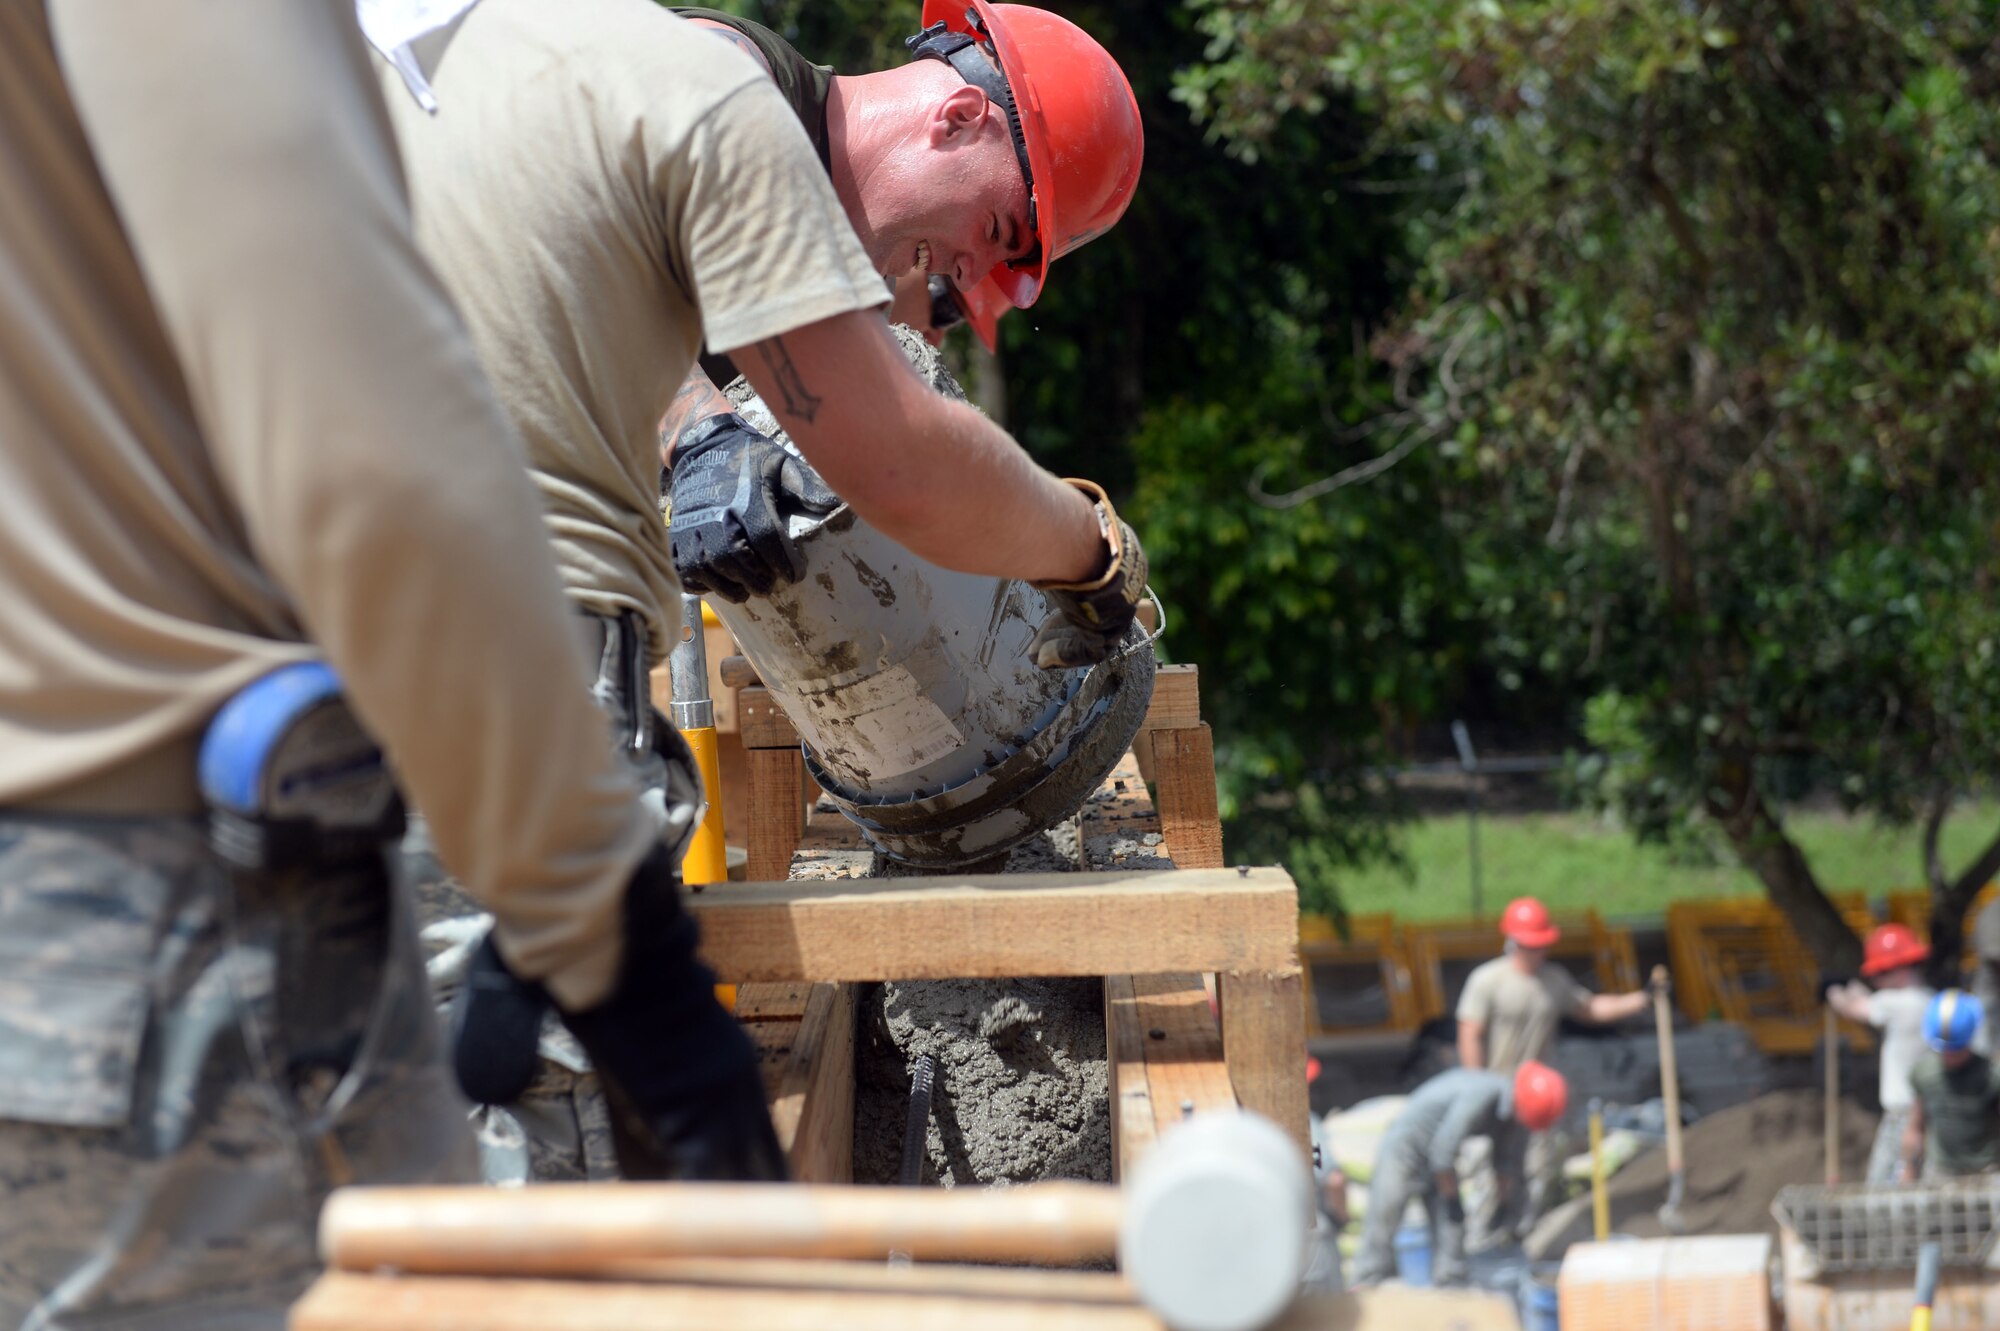 U.S. Marine Staff Sgt. Andrew Smith, a combat engineer with a 271st Marine Wing Support Squadron, 2nd Marine Air Wing, pours cement into a wood frame to create a bond beam for the new two-room schoolhouse at the Gabriela Mistral school construction site in Ocotes Alto, Honduras, June 22, 2015. The school project is one part of the NEW HORIZONS Honduras 2015, an annual humanitarian and training exercise put on by U.S. Southern Command. NEW HORIZONS was launched in the 1980s and is an annual joint humanitarian assistance exercise that U.S. Southern Command conducts with a partner nation in Central America, South America or the Caribbean. The exercise improves joint training readiness of U.S. and partner nation civil engineers, medical professionals and support personnel through humanitarian assistance activities. (U.S. Air Force photo by Capt. David J. Murphy/Released)